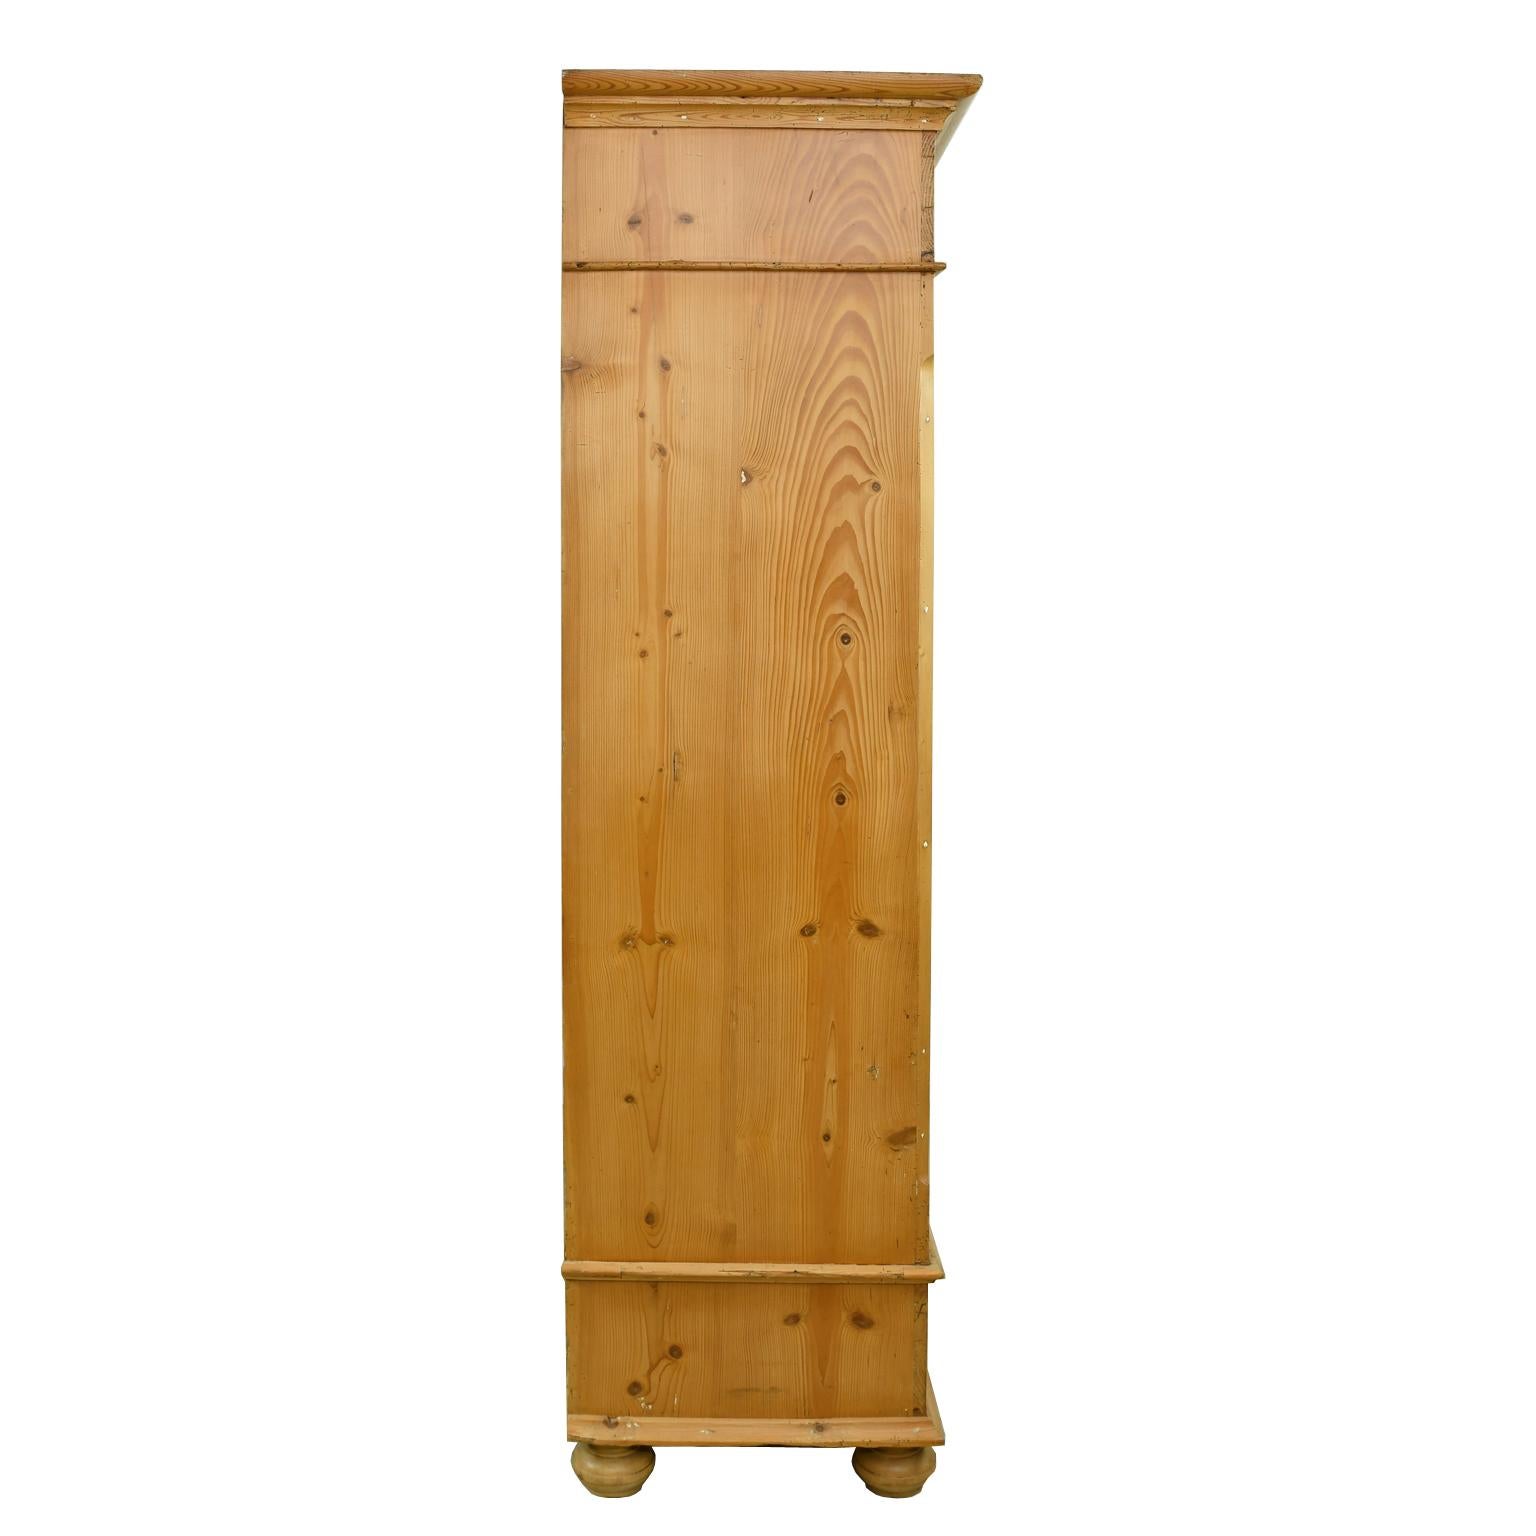 Early 19th Century Large Armoire in Pine with Interior Storage Shelves, Northern Germany